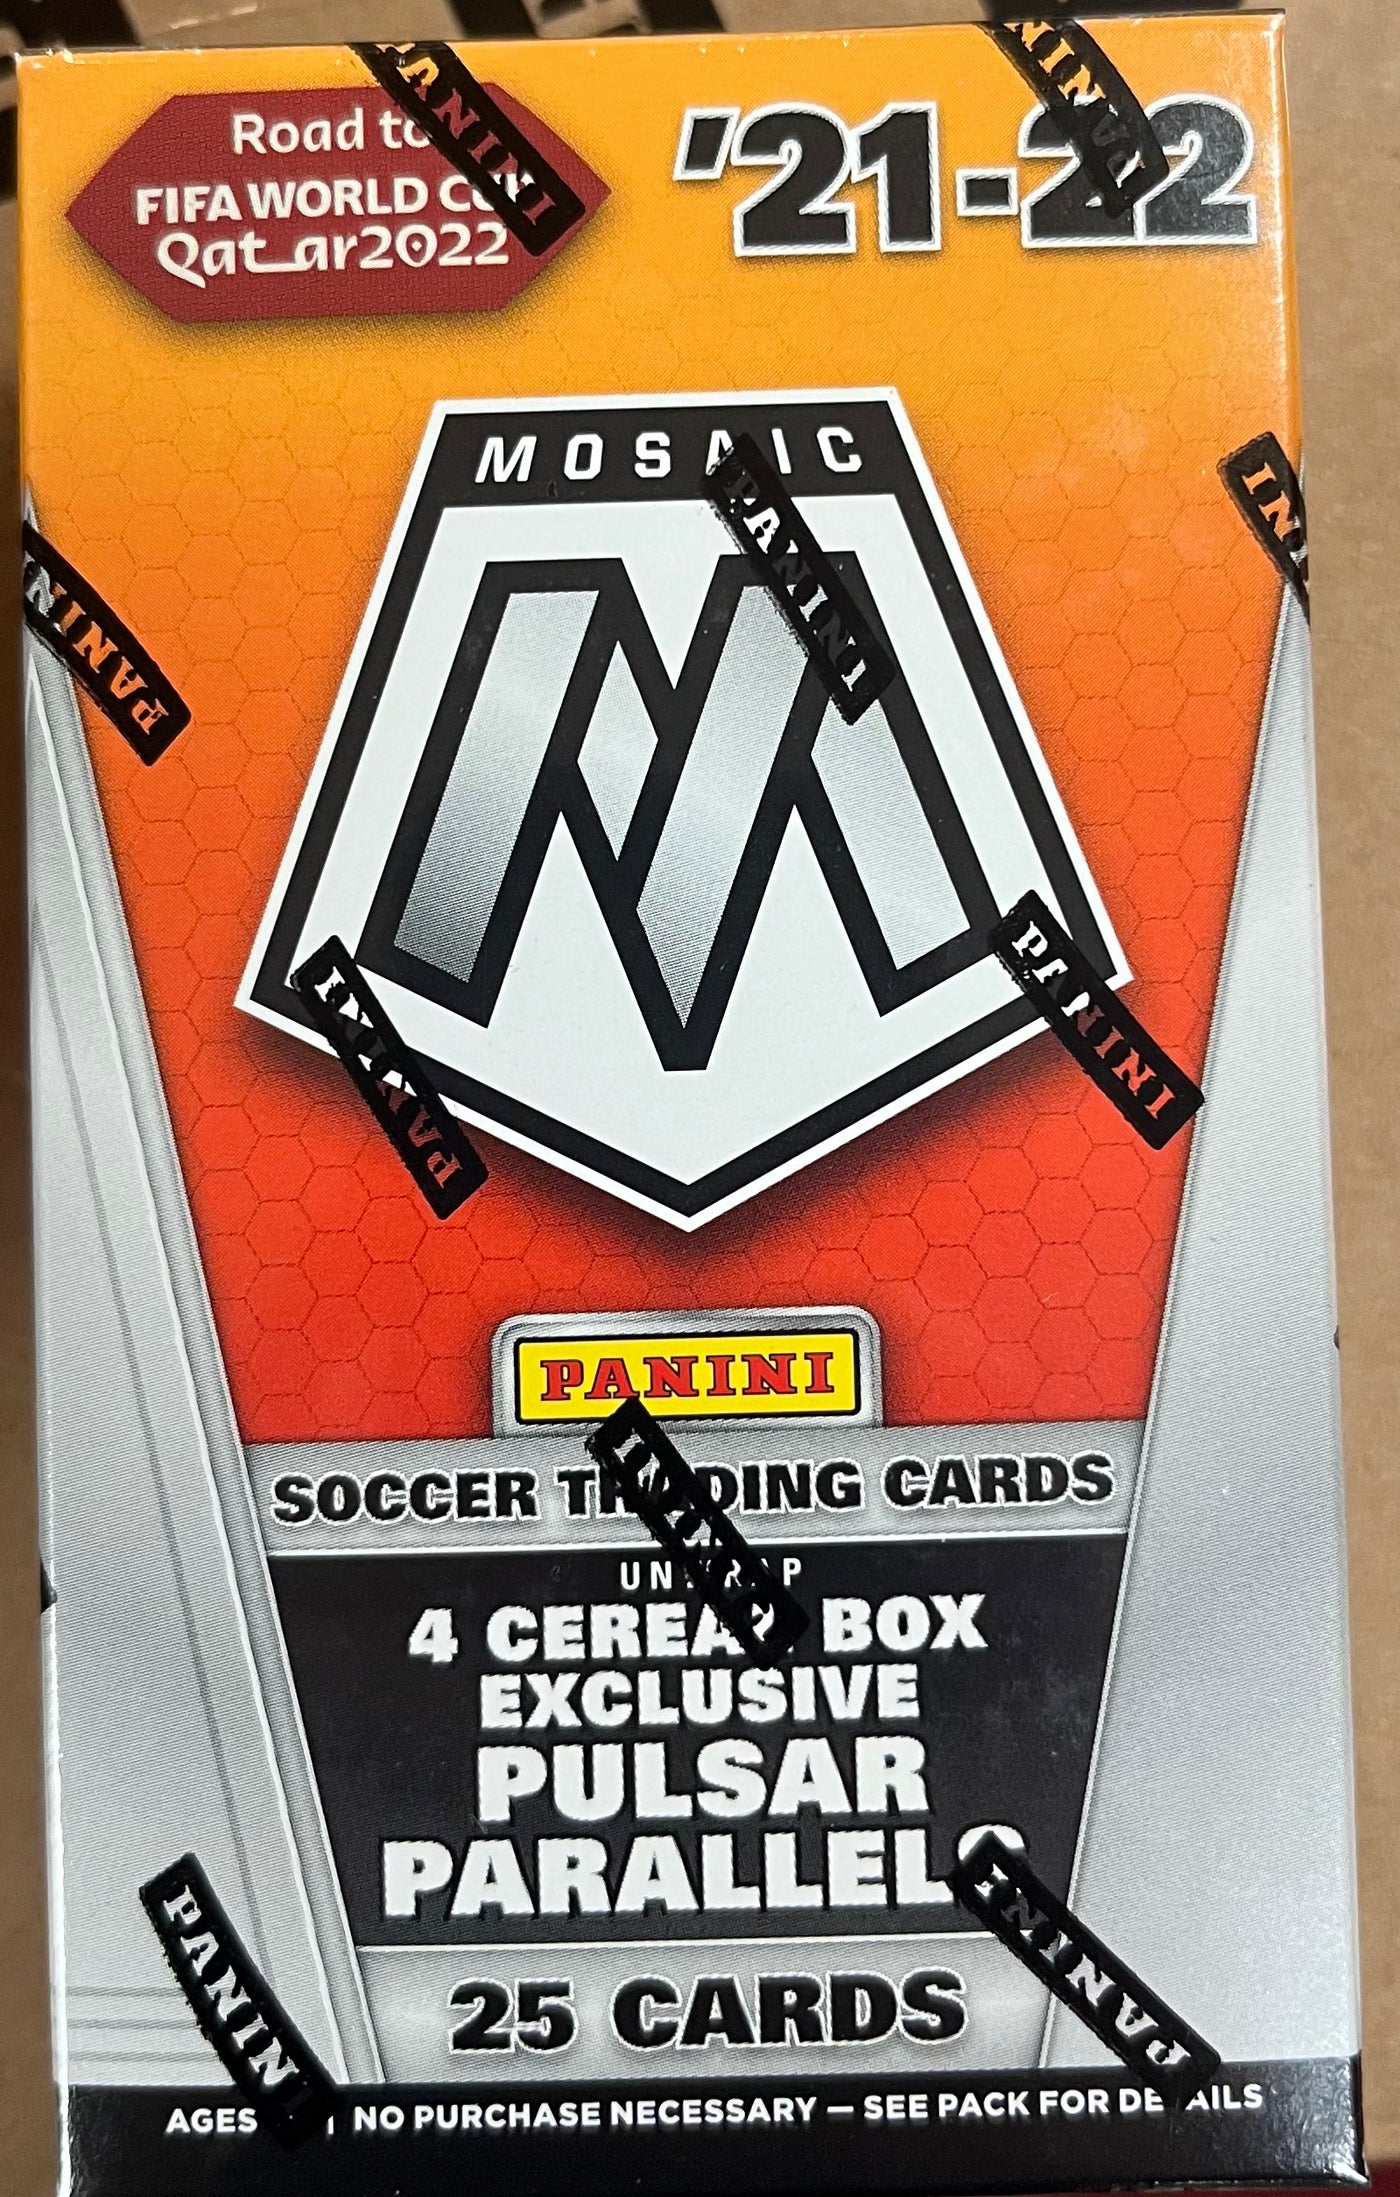 2021-22 Mosaic World Cup Soccer Cereal Box